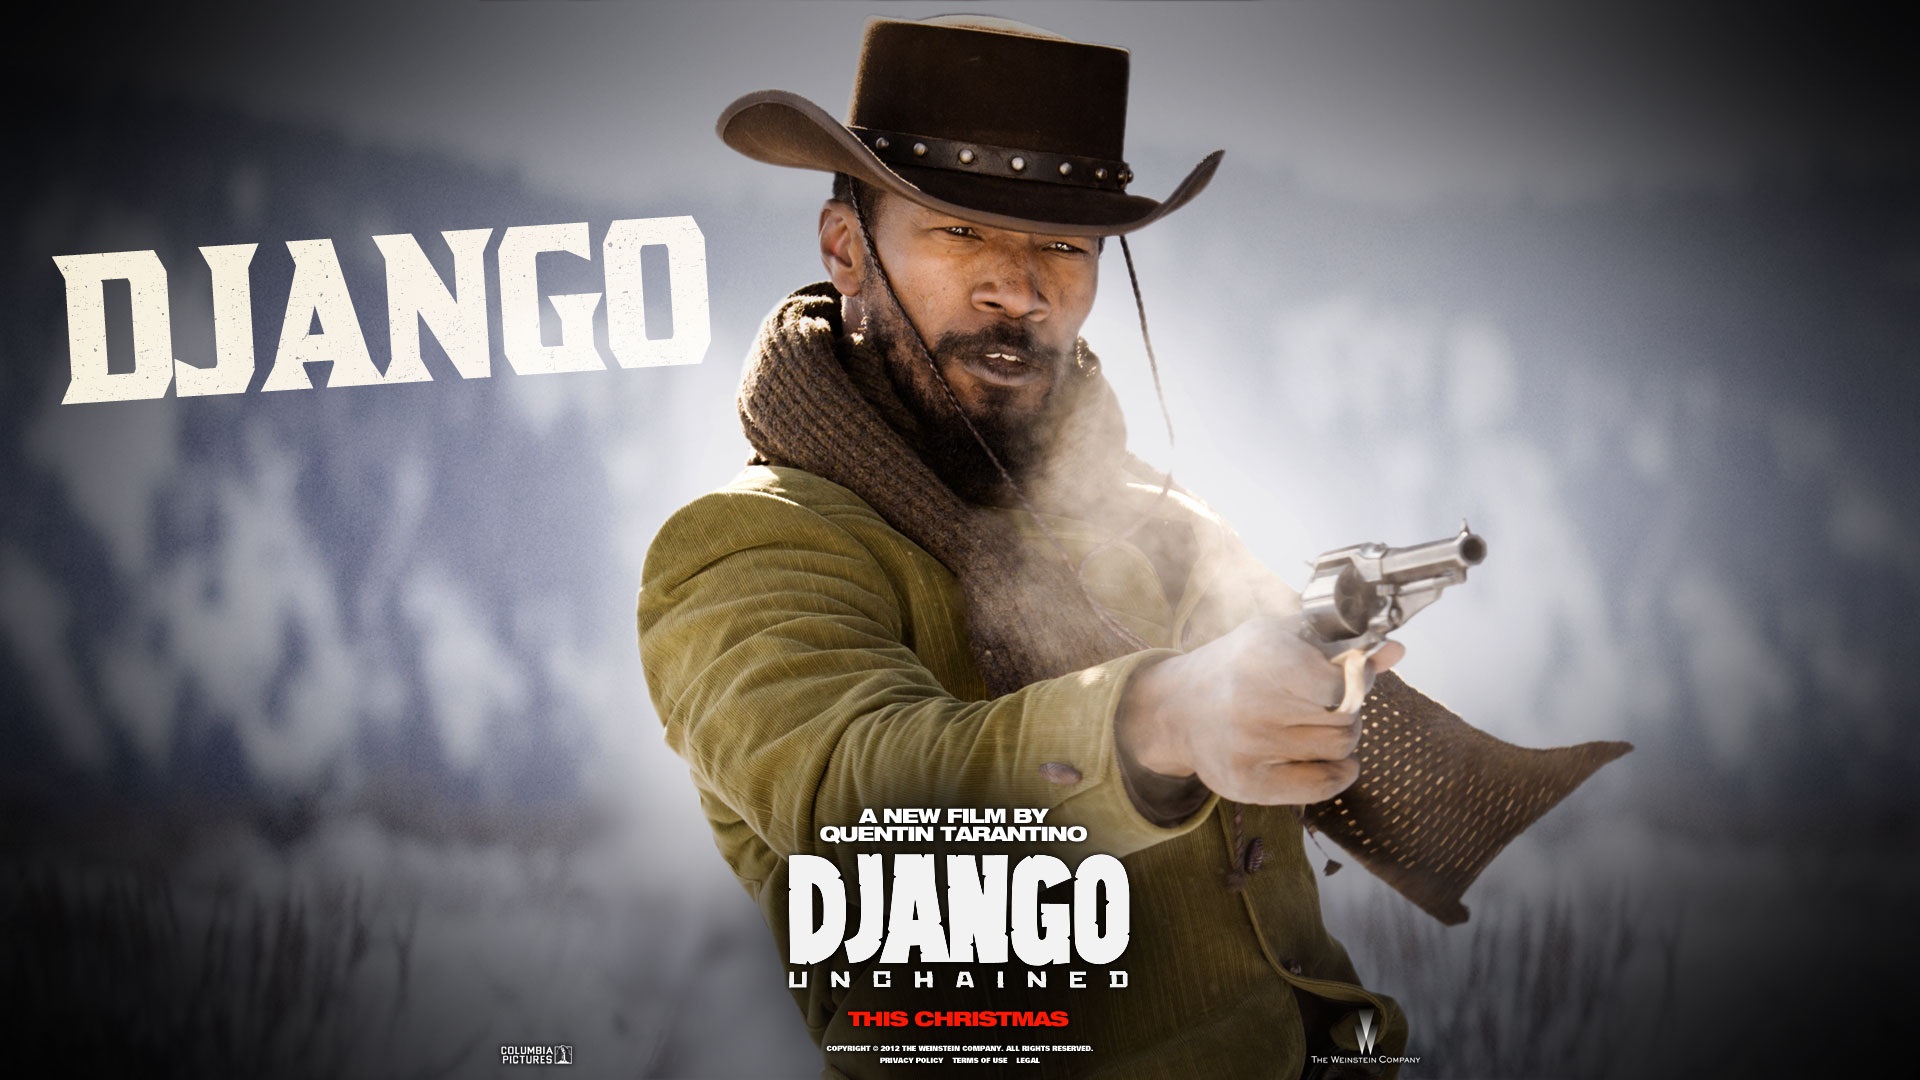 Django Unchained Blu-ray Steelbook will be a Target Exclusive